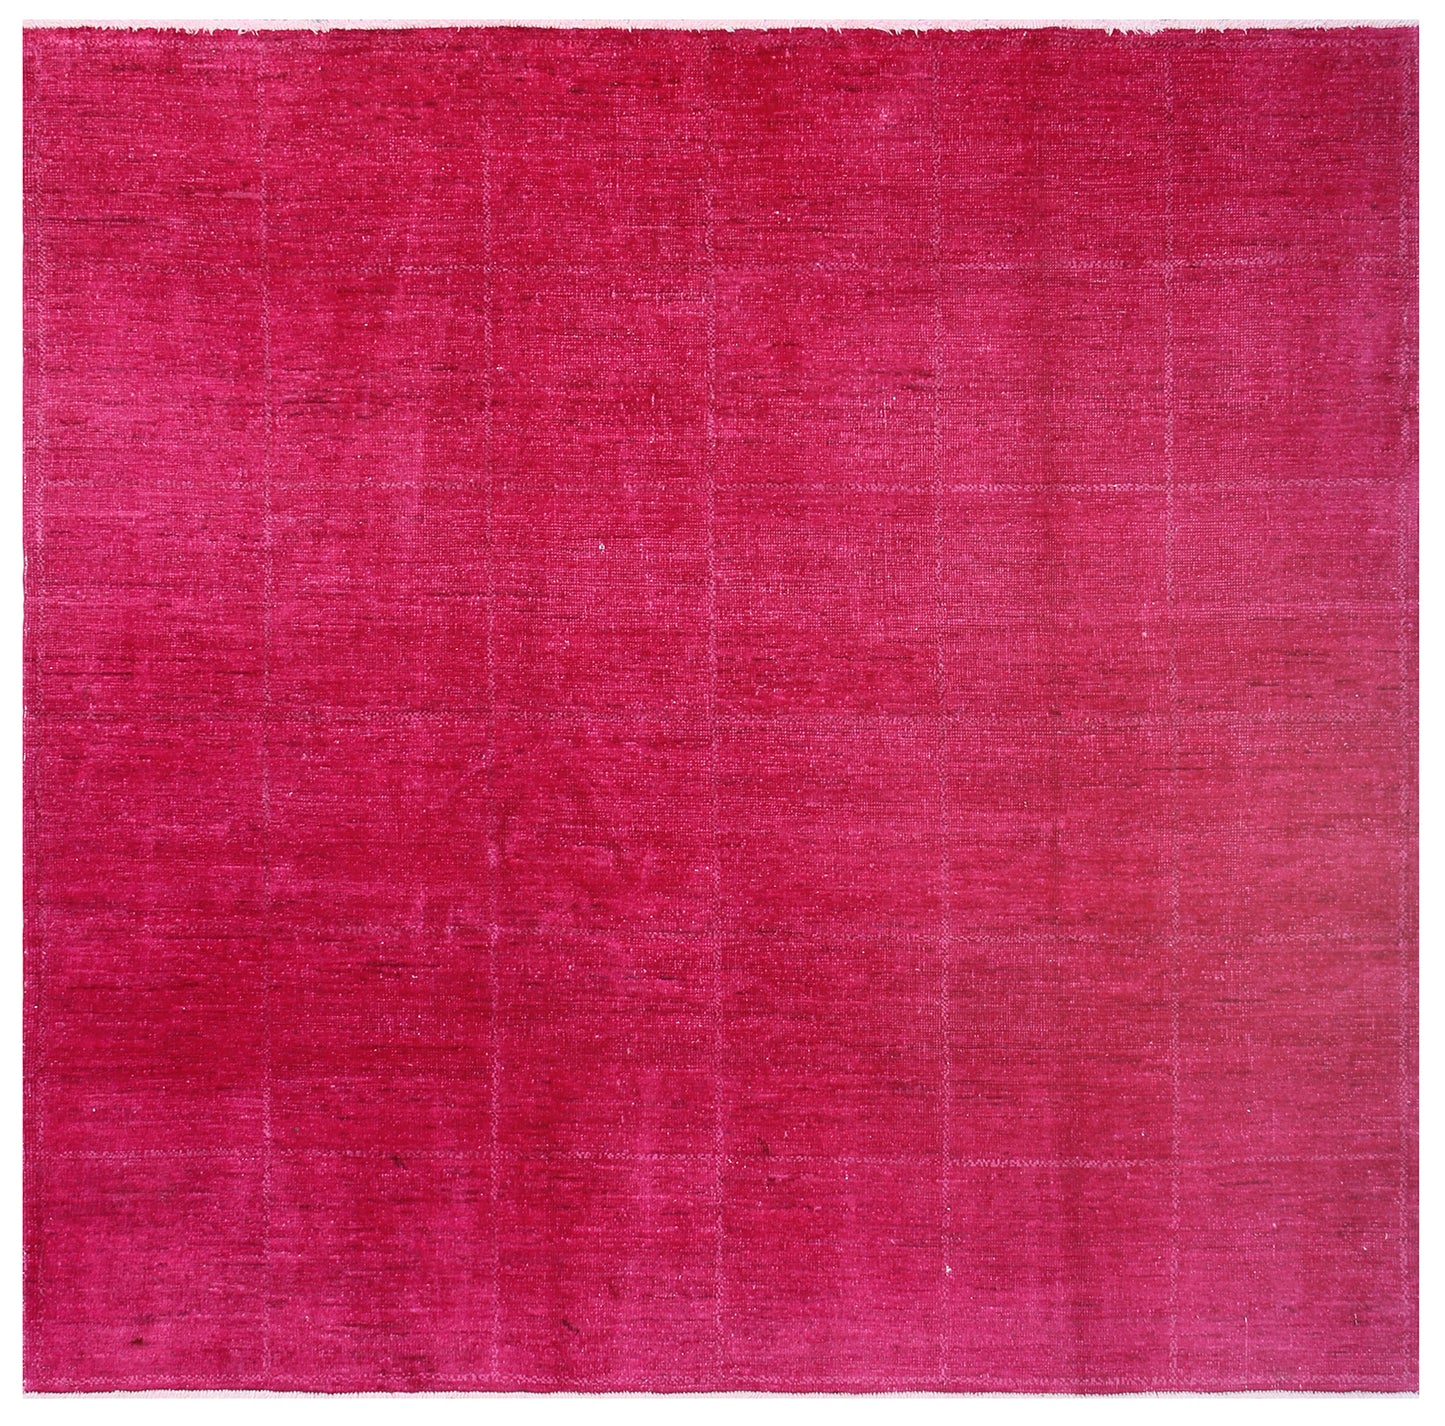 6'x6' Ariana square Vintage Collection Over-dye Rug